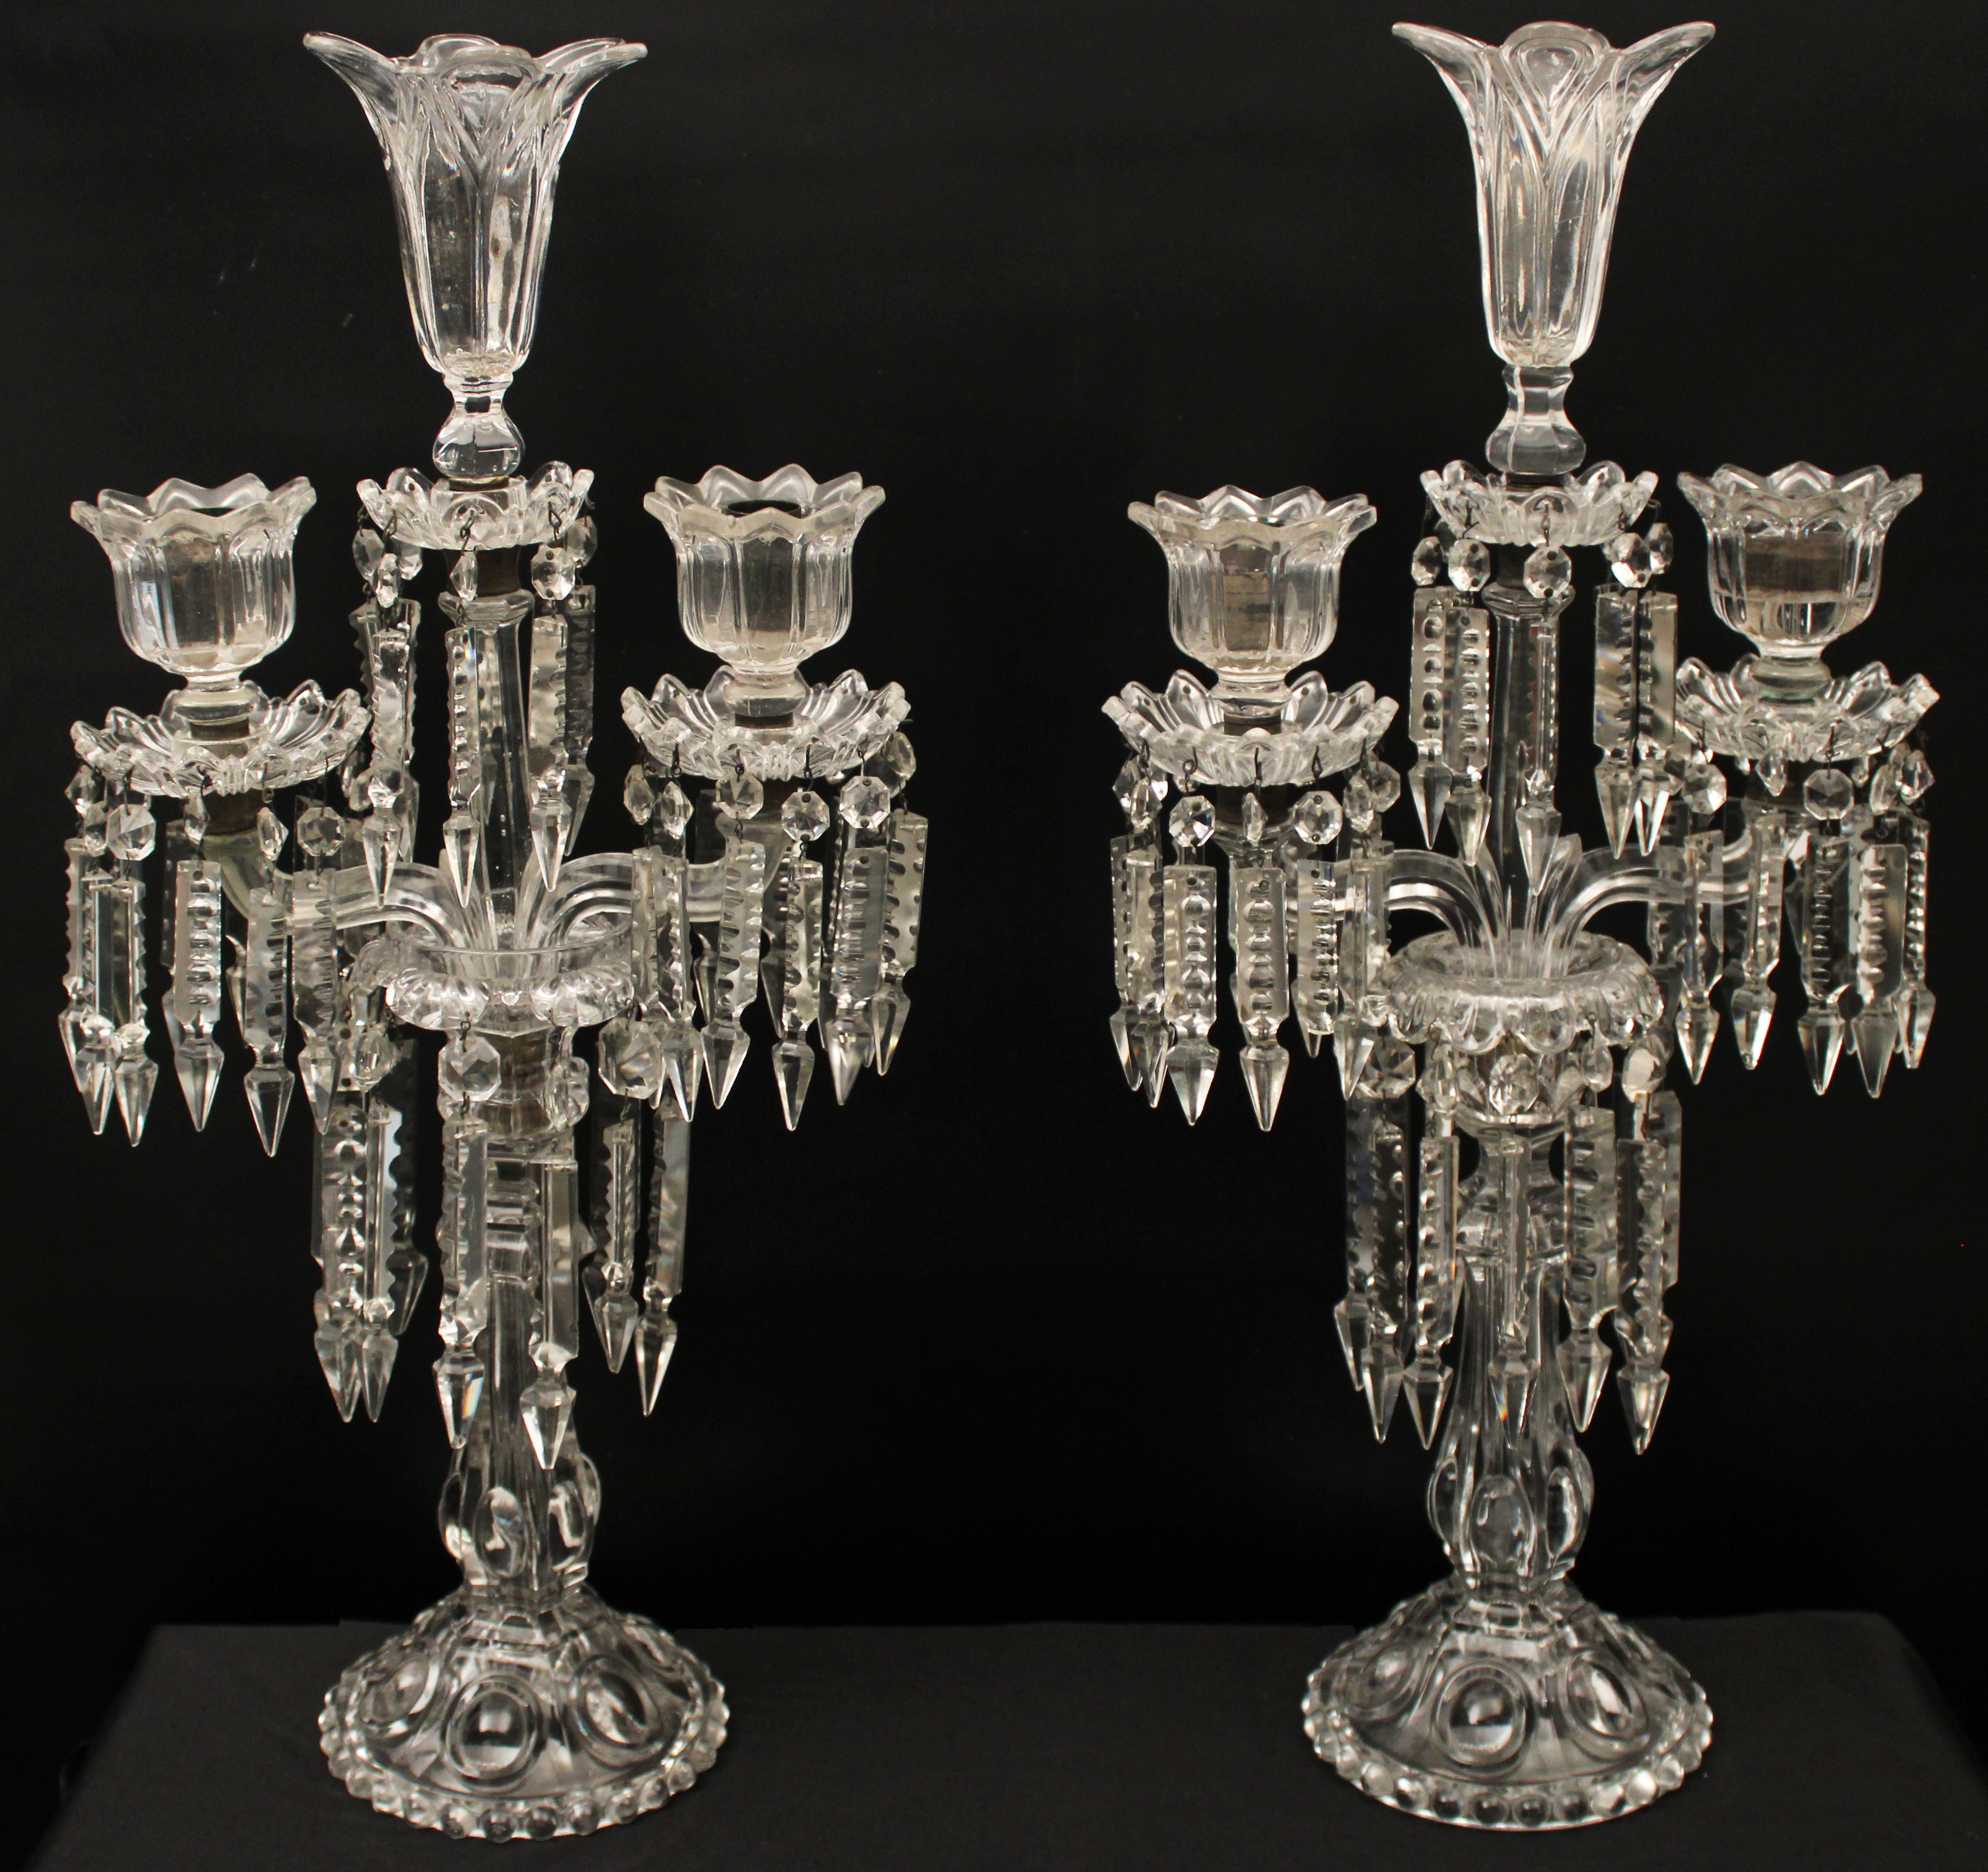 PR OF FRENCH BACCARAT CRYSTAL 35f2df